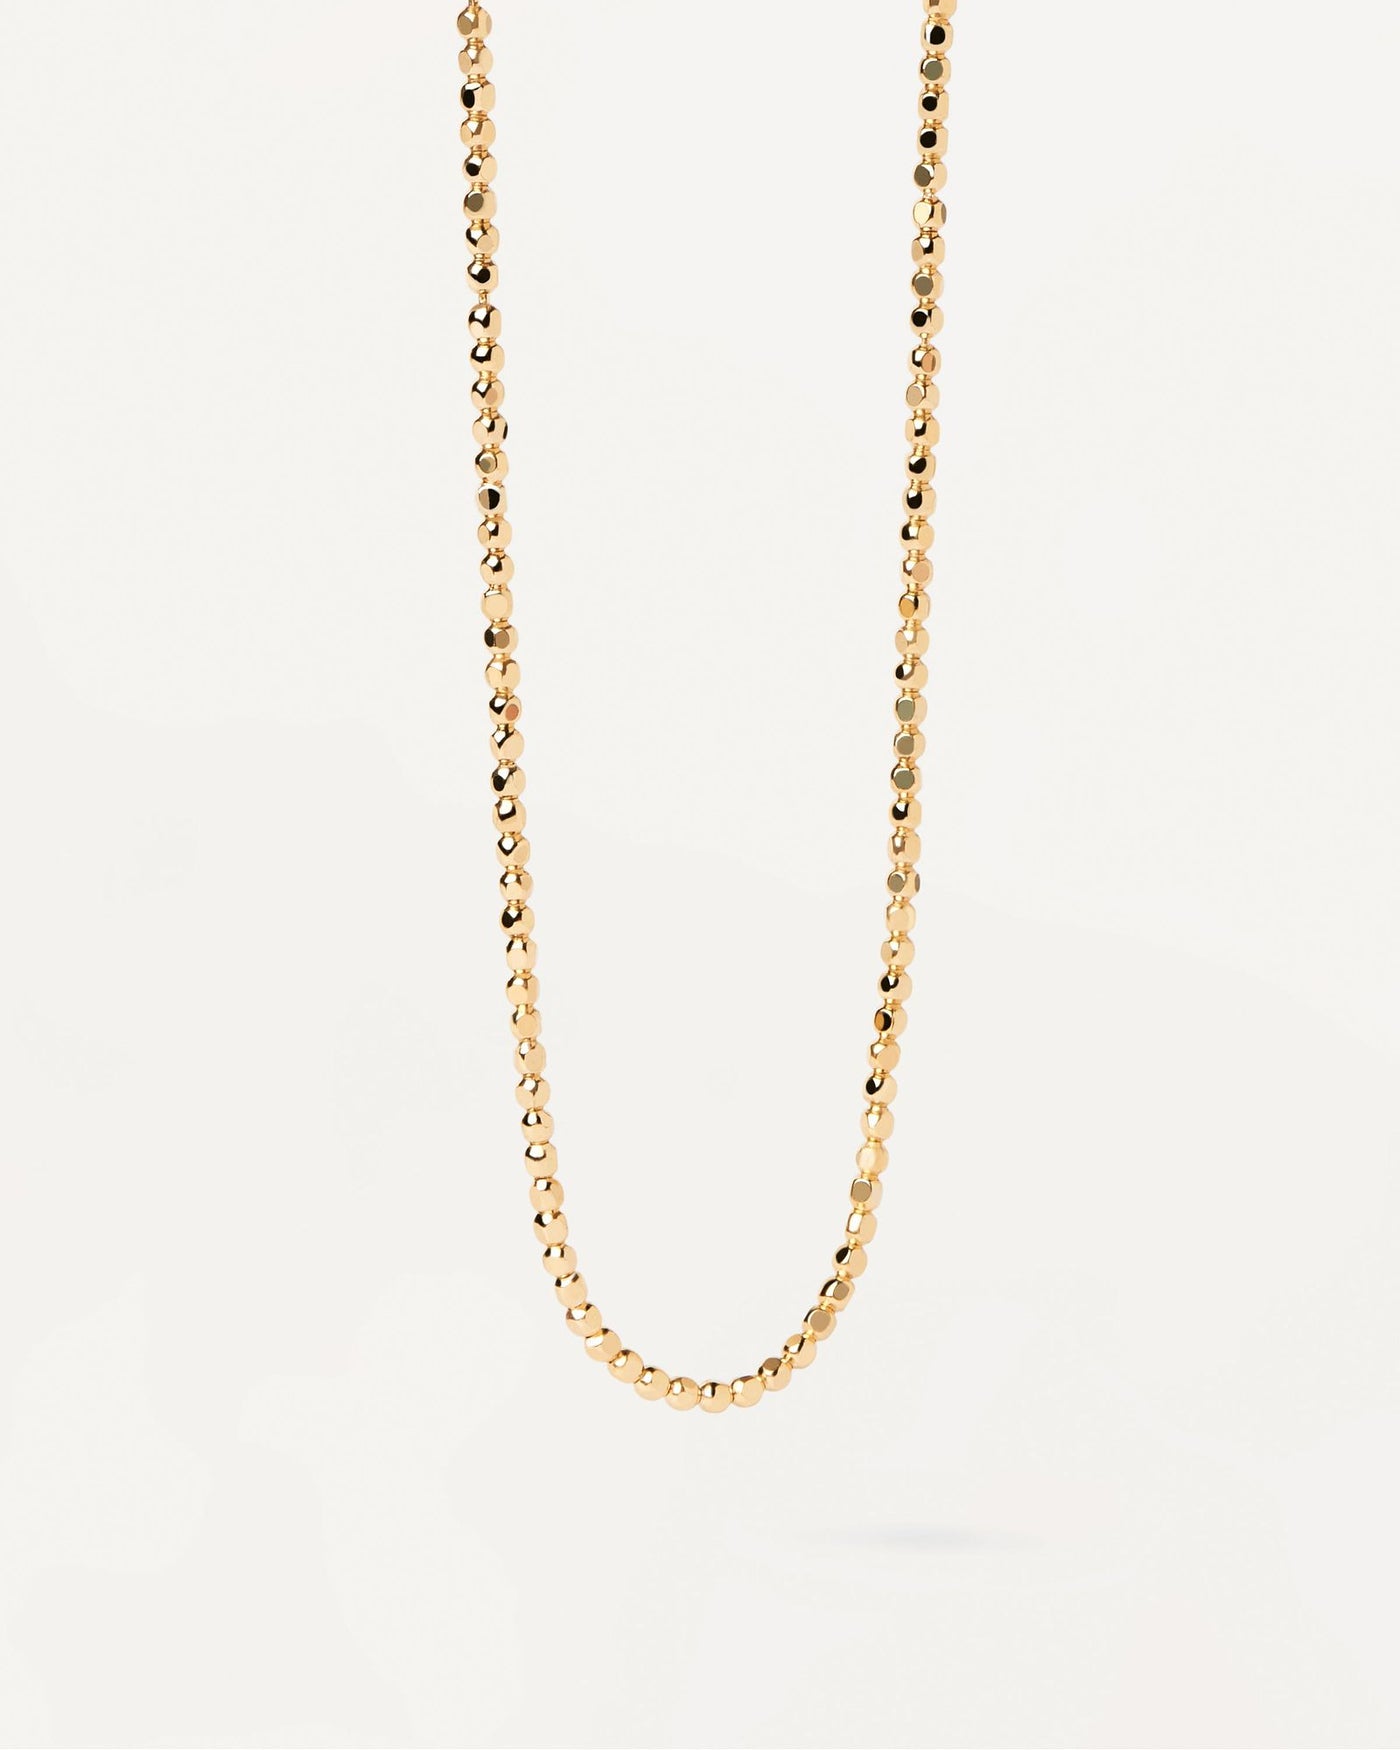 2024 Selection | Marina Chain Necklace. Gold-plated silver necklace with asymetric bead links. Get the latest arrival from PDPAOLA. Place your order safely and get this Best Seller. Free Shipping.